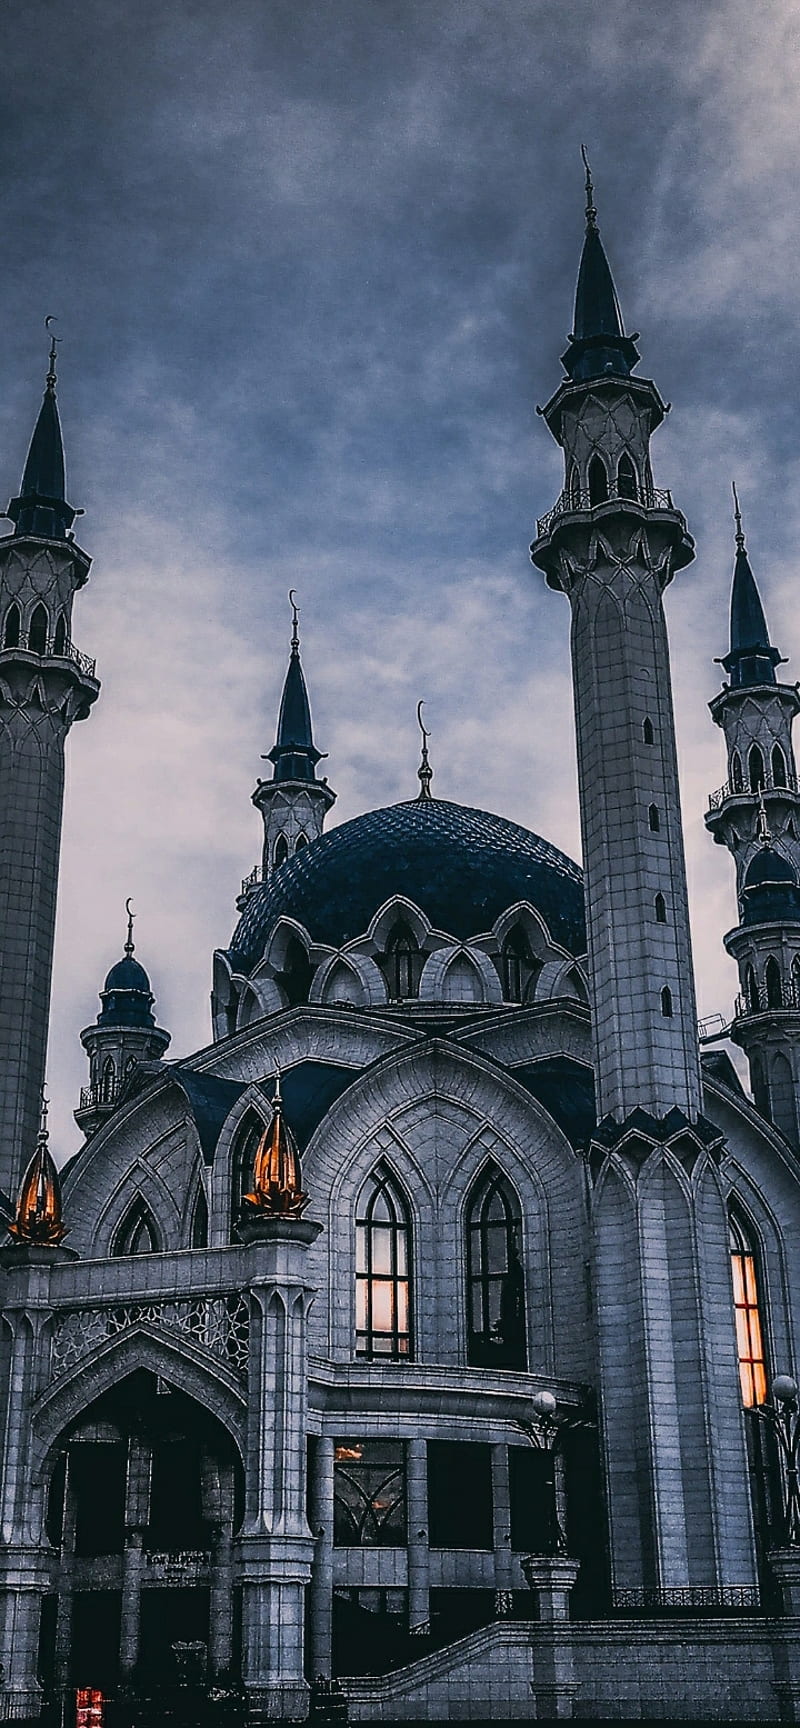 3000 Mosque Pictures and Images in HiRes  Pixabay